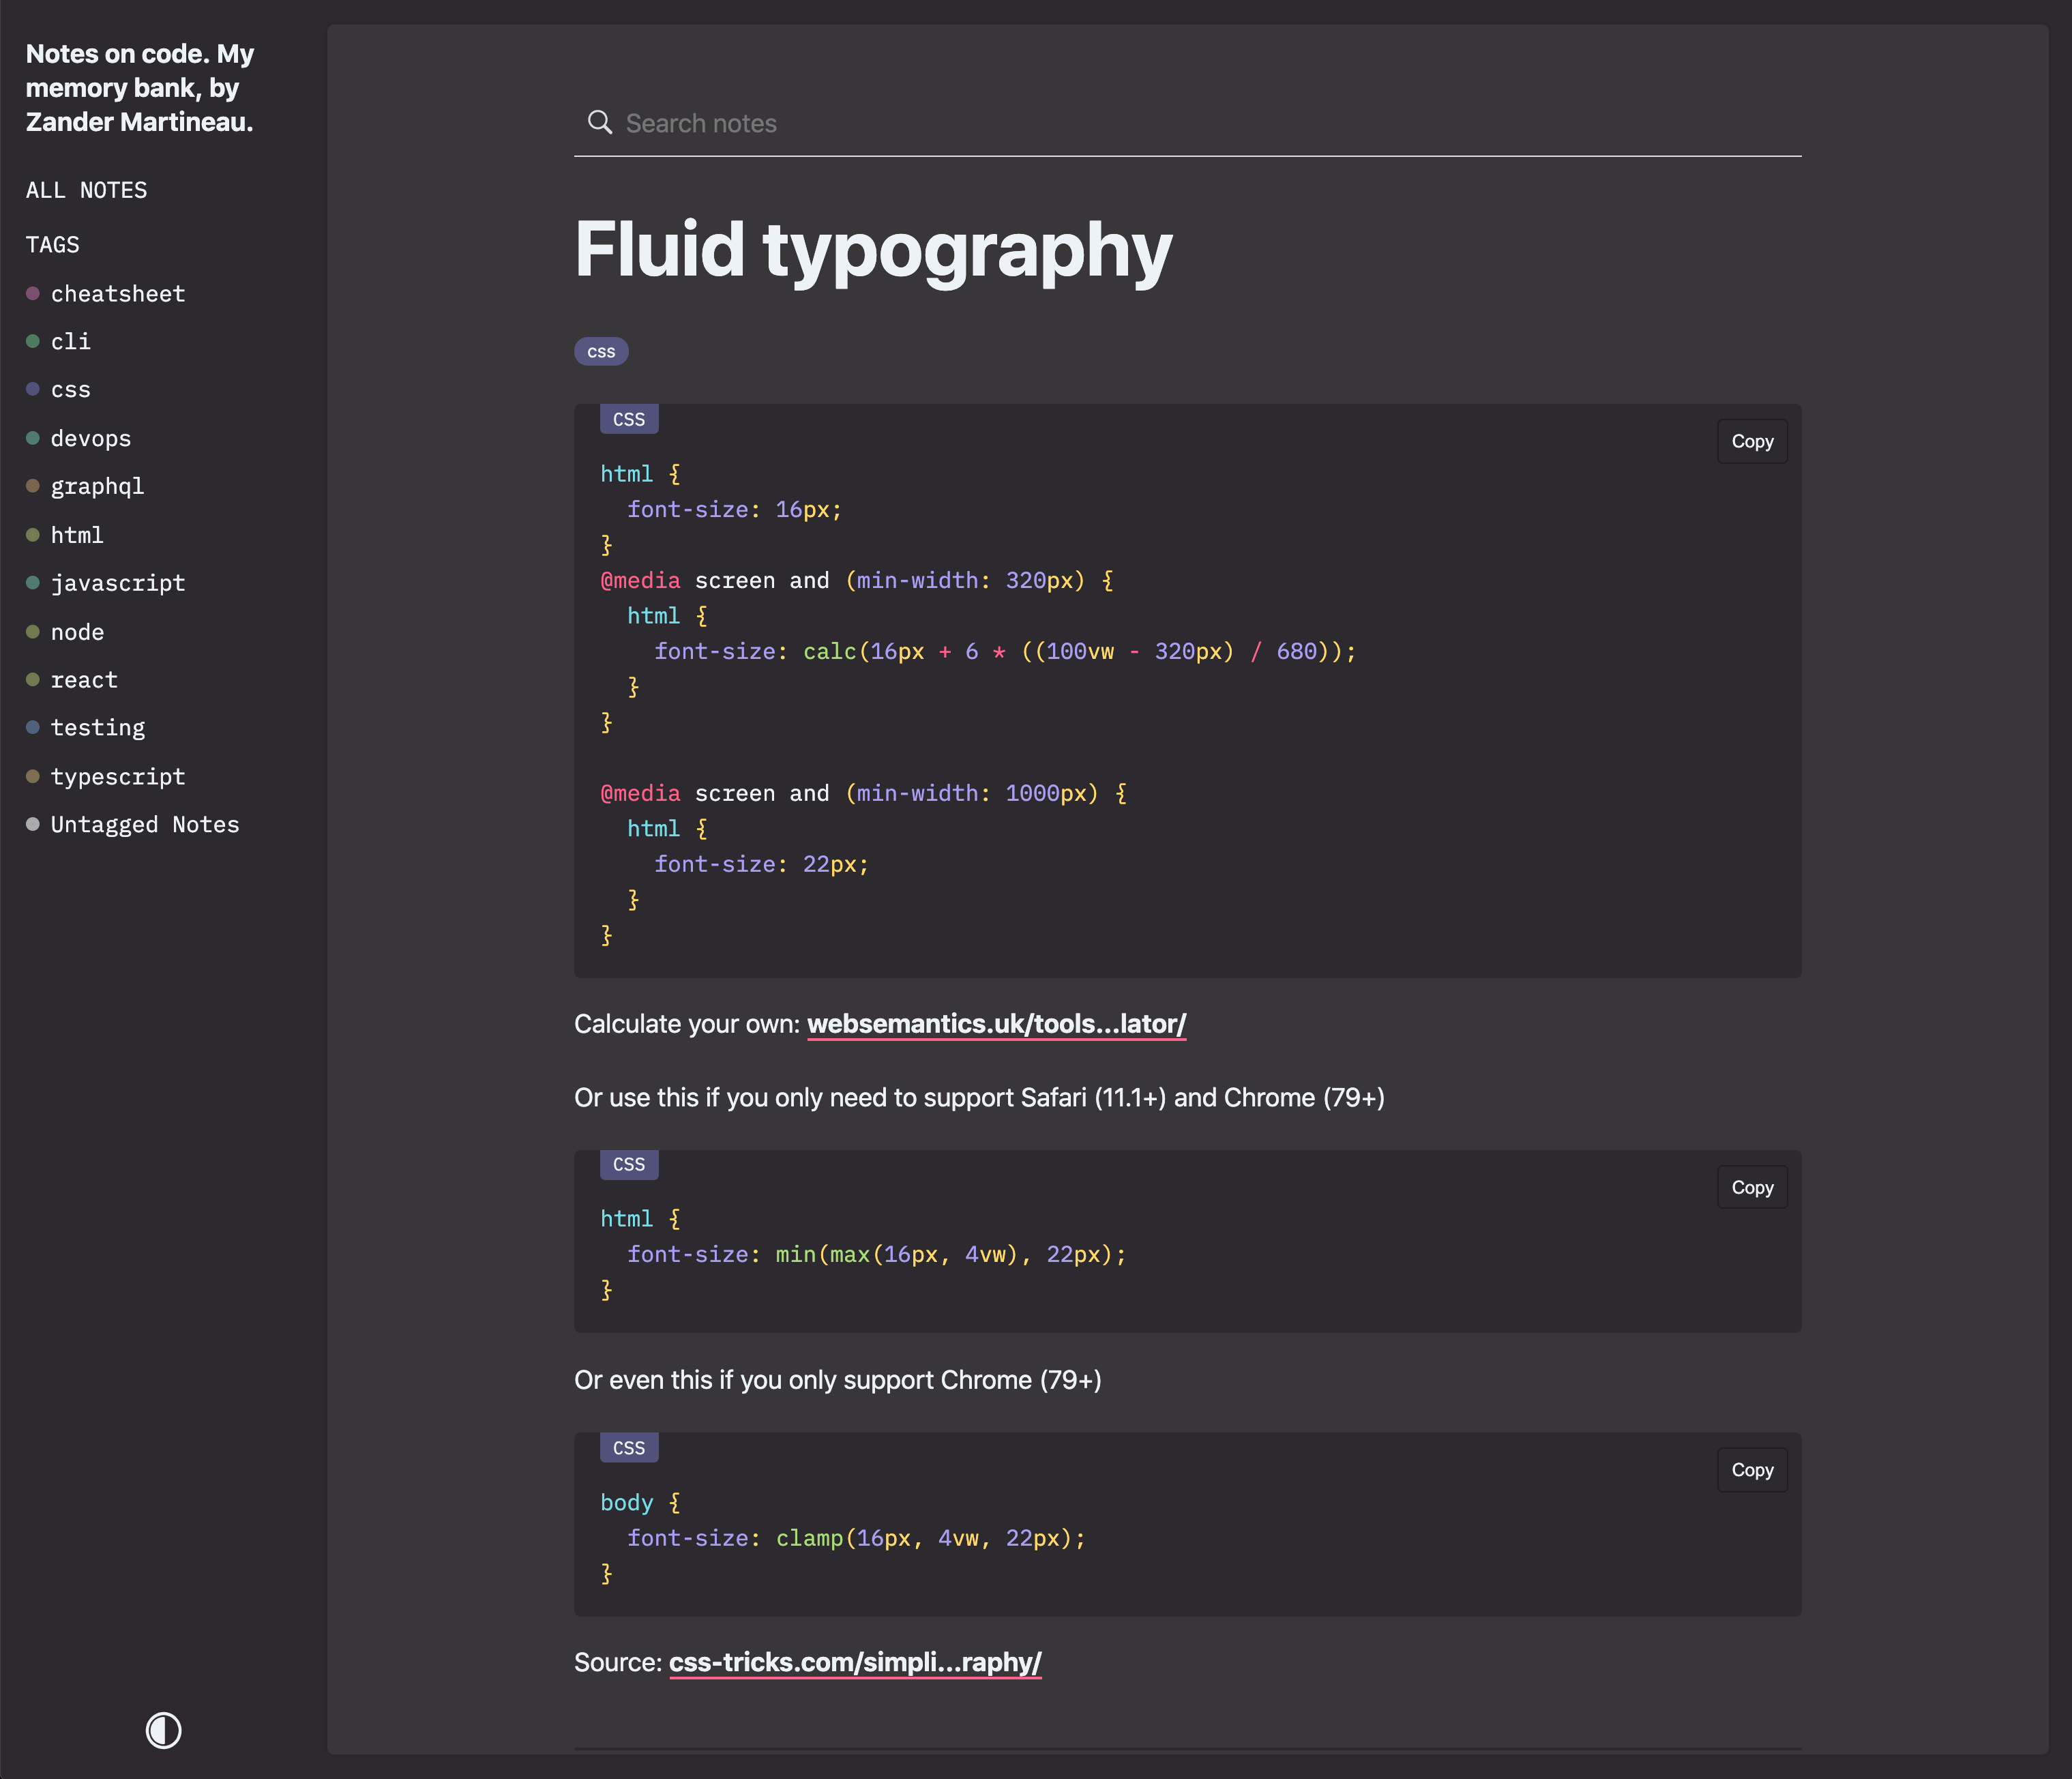 Screengrab of what a note looks like with the dark theme activated